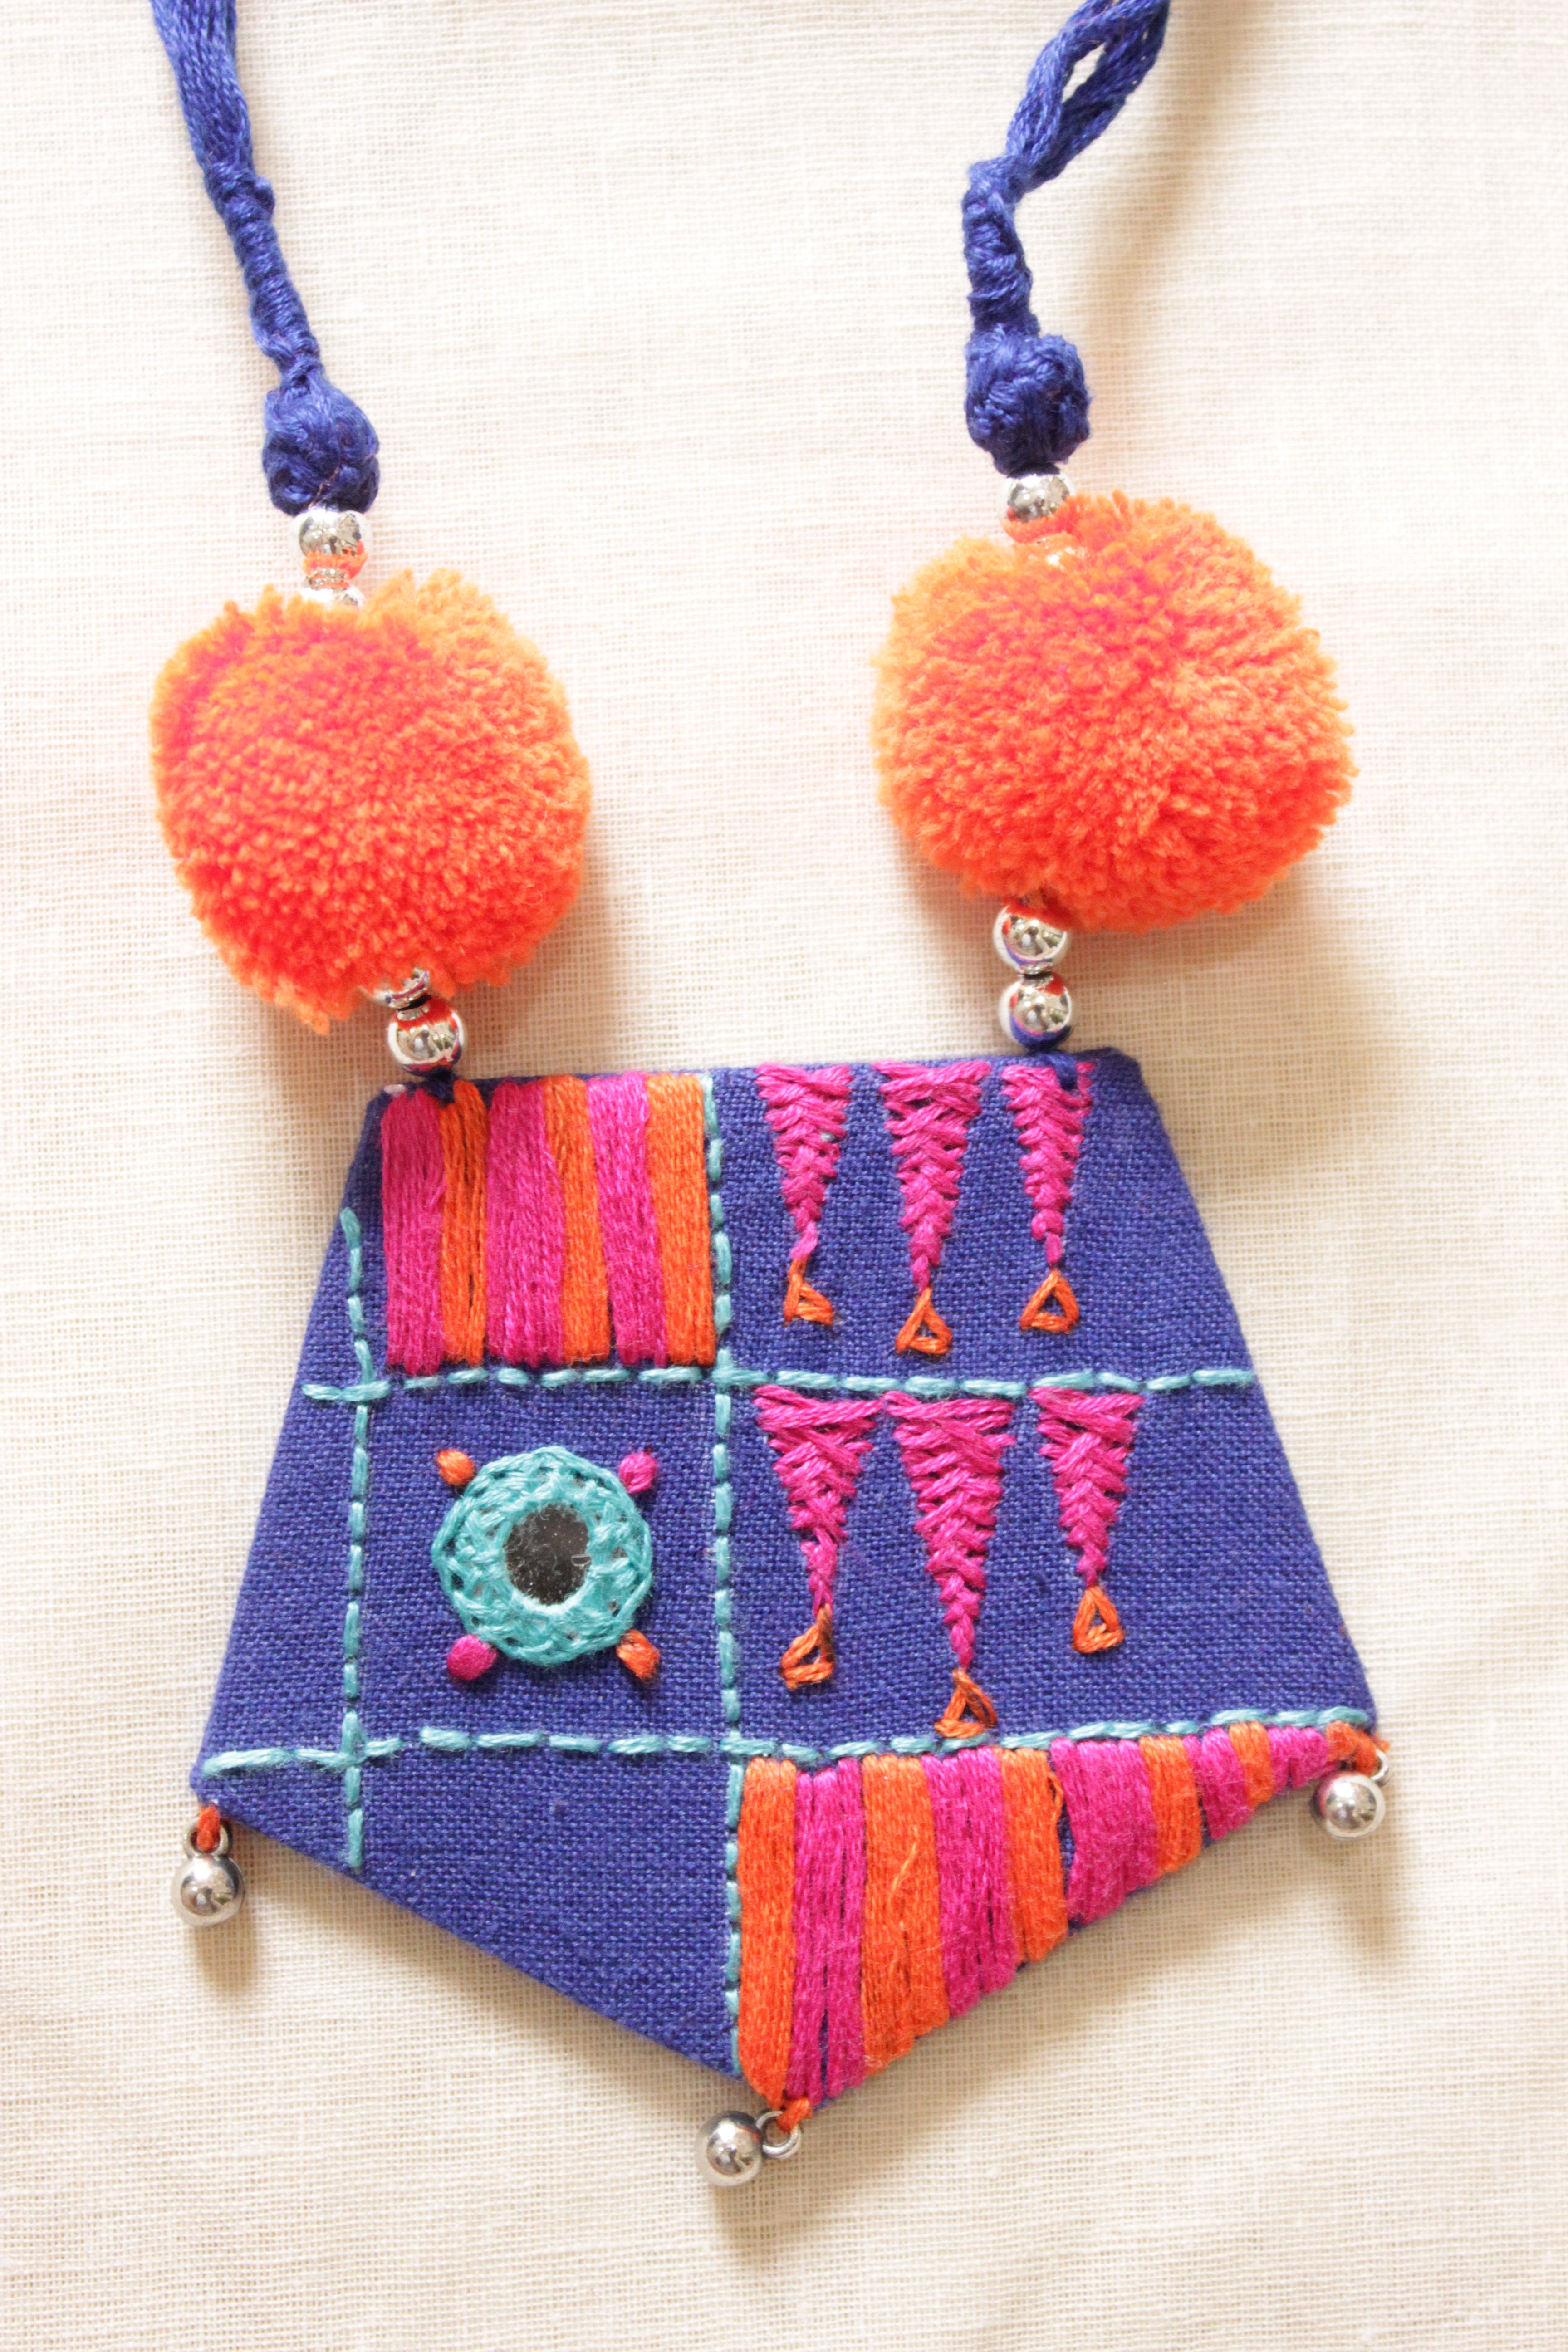 Violet and Orange Handcrafted Mirror Work Fabric Necklace